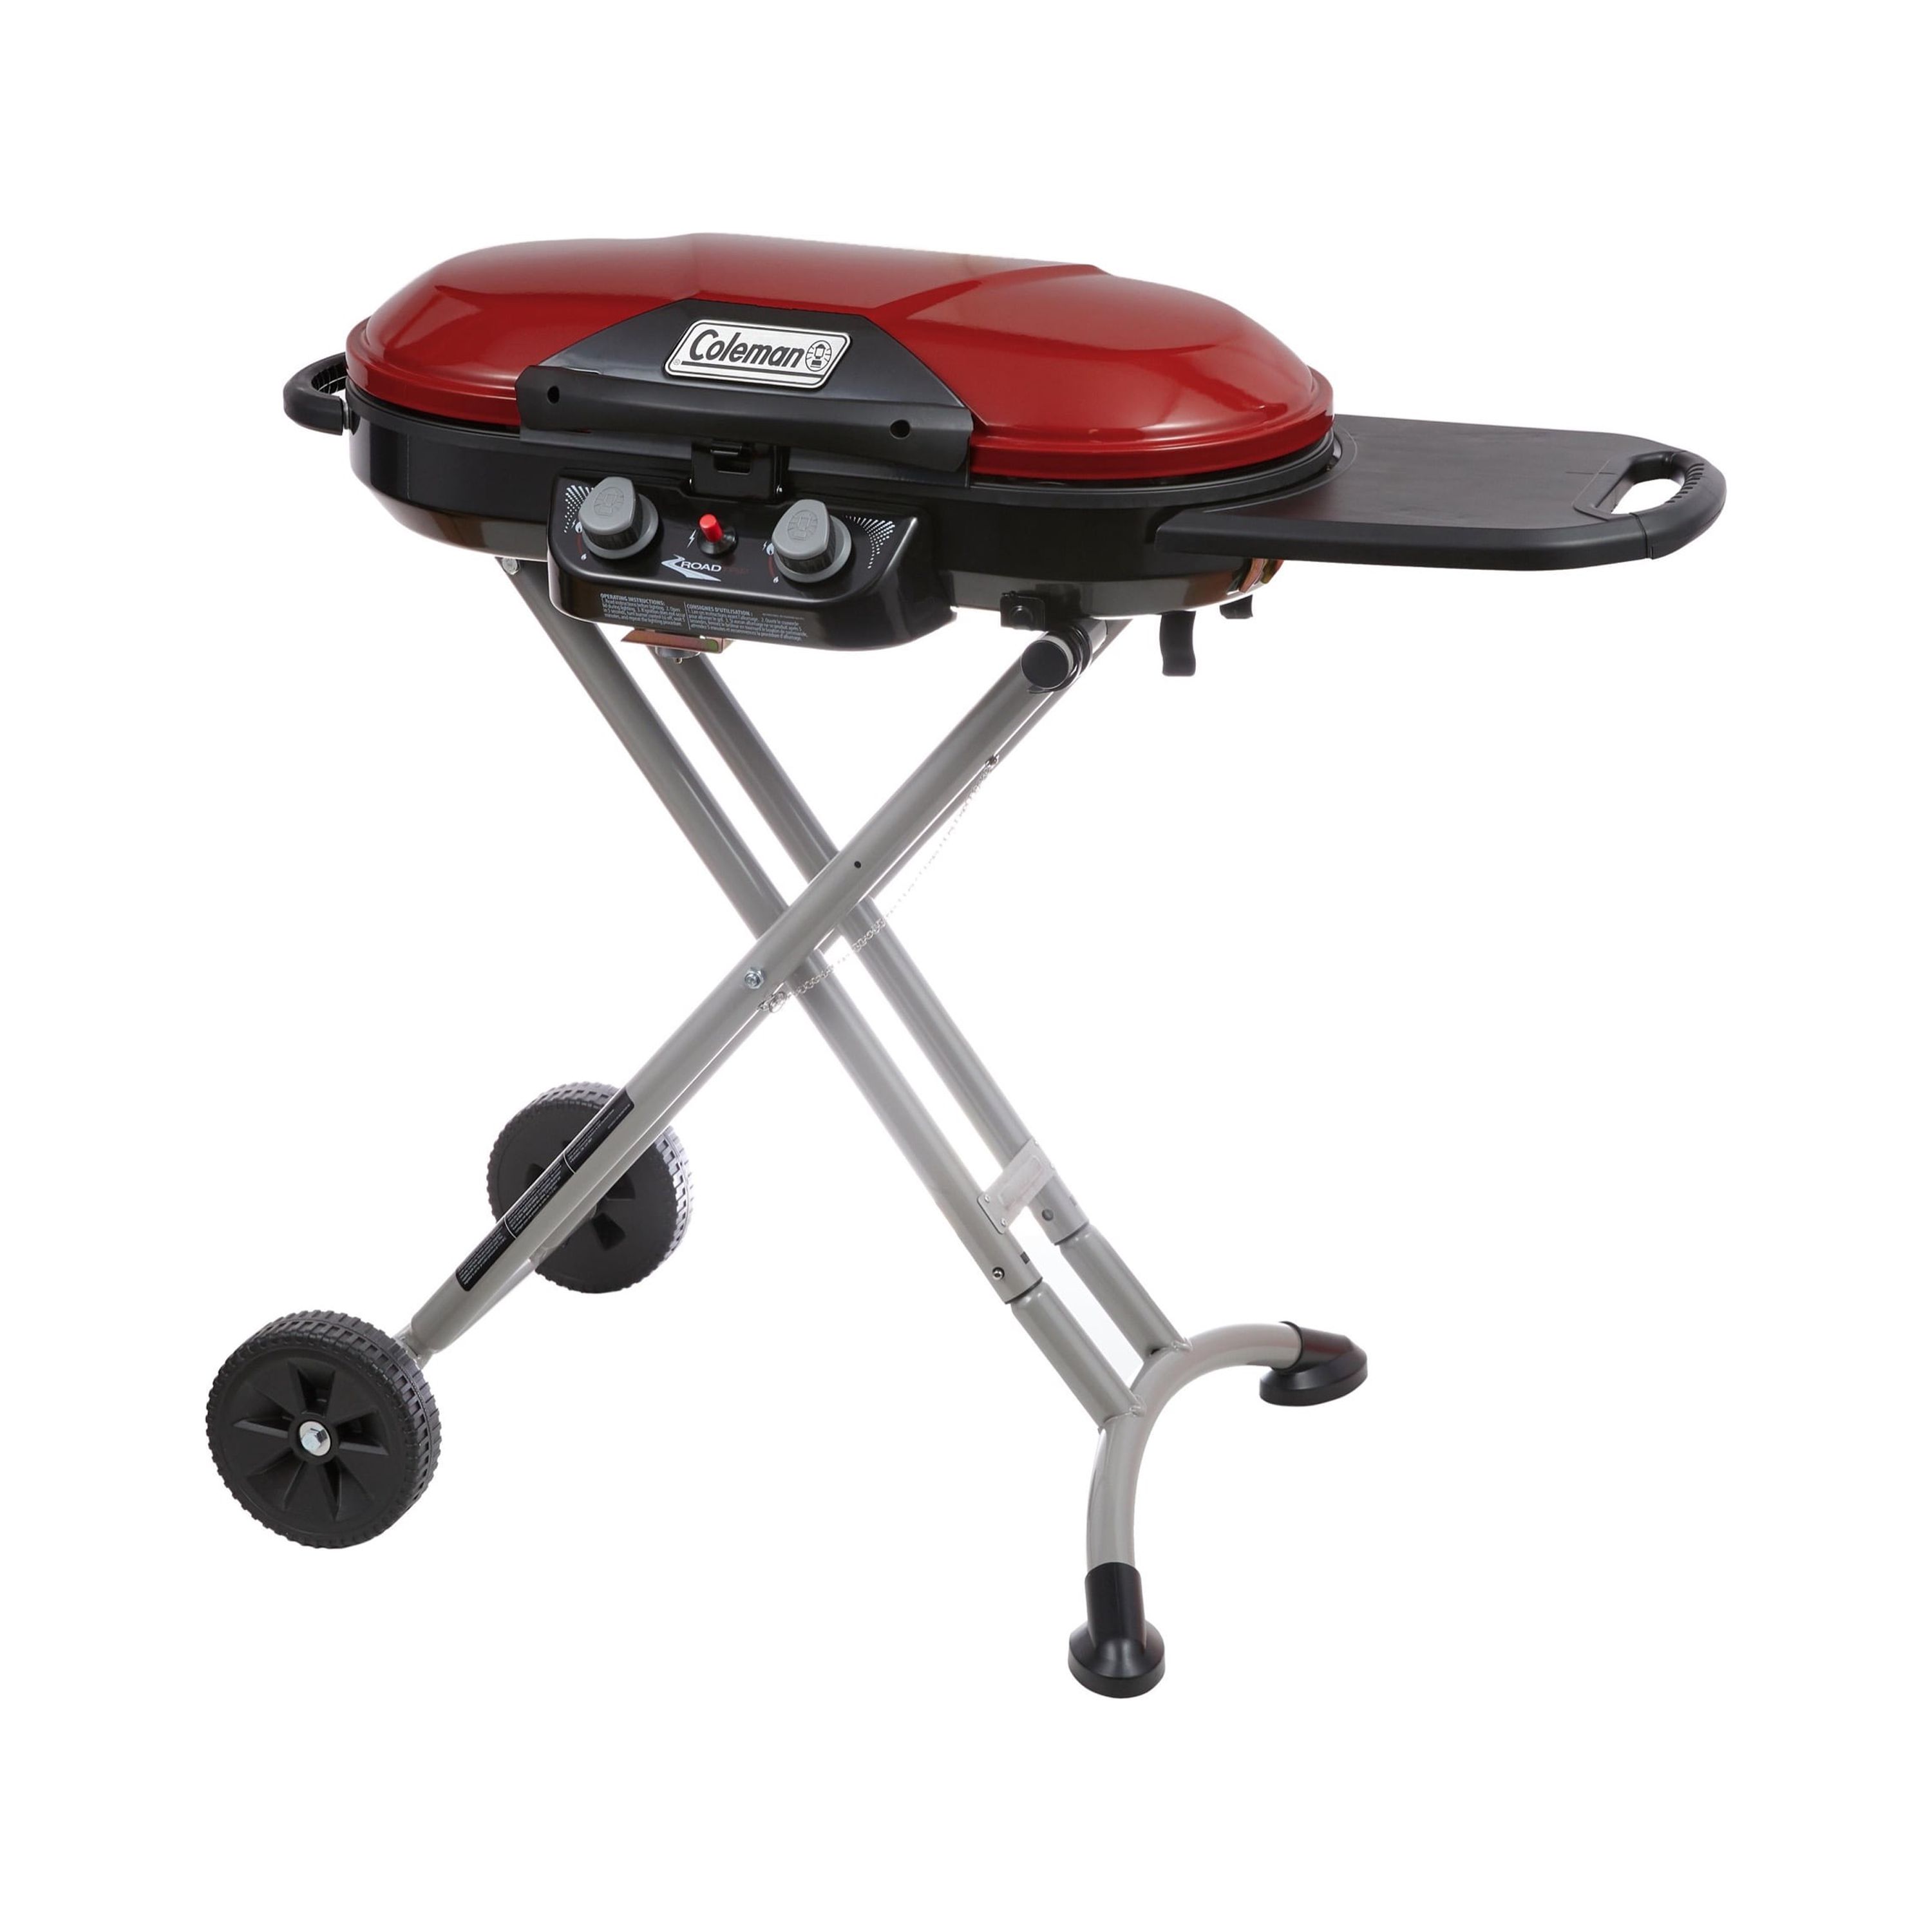 Coleman® Roadtrip X-Cursion™ Portable Grill In Striking Red C001- Perfect for Camping, Tailgating, Picnics And More - image 1 of 9